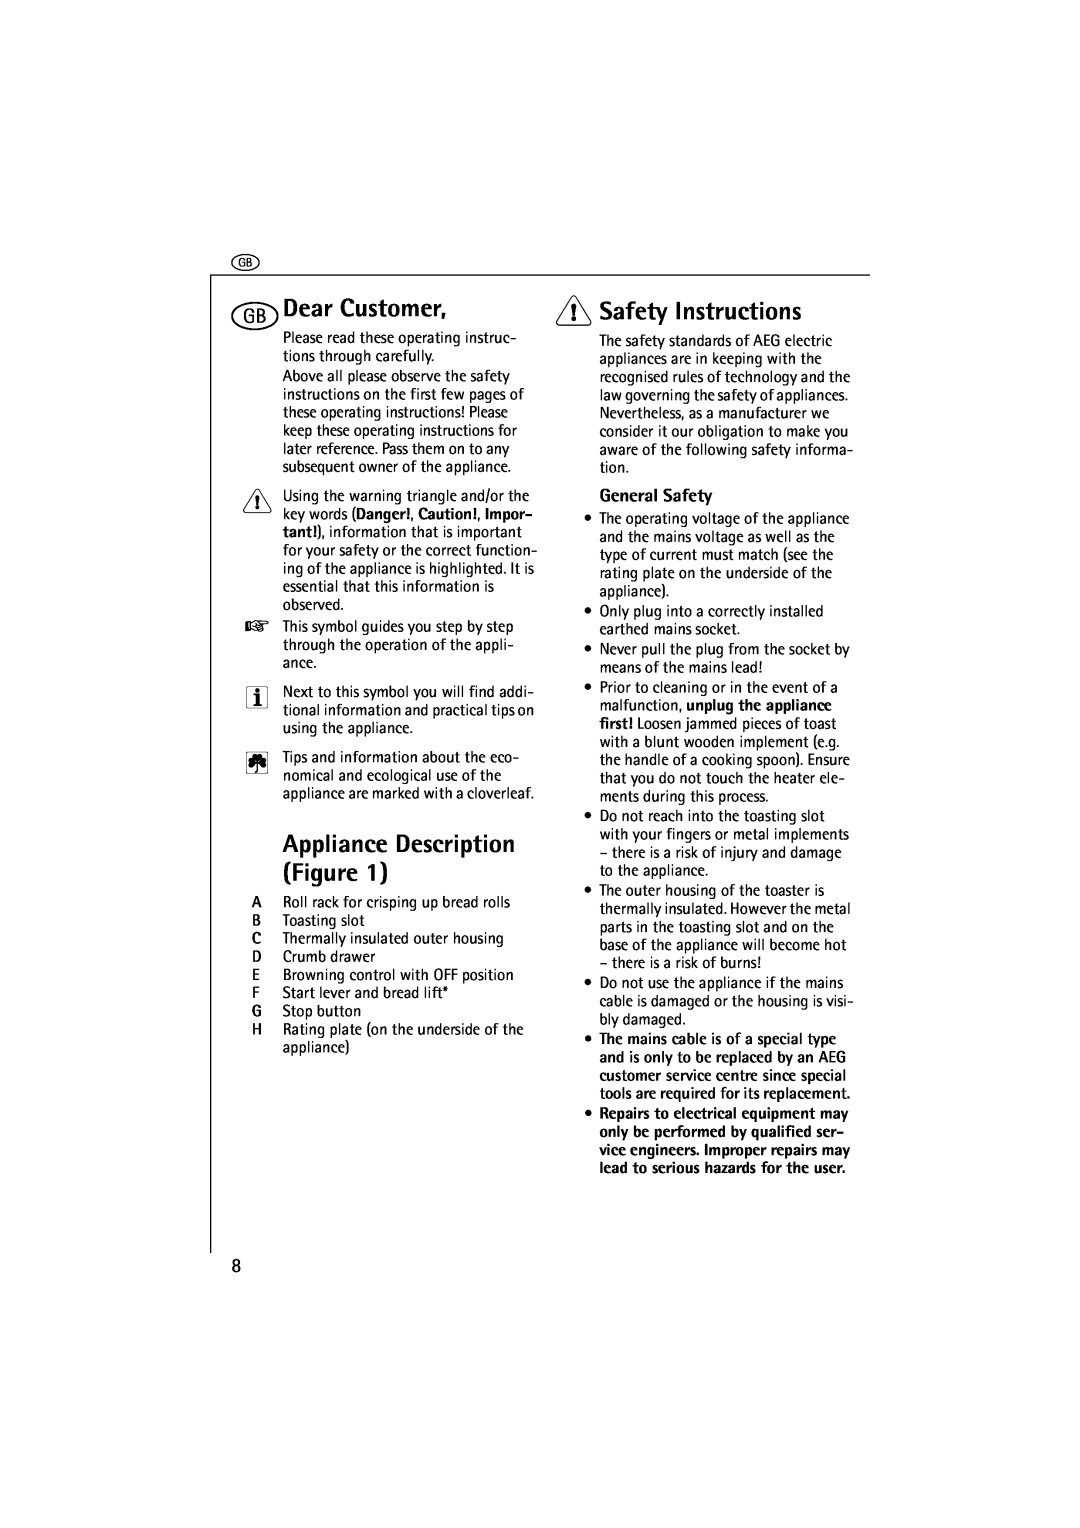 AEG AT 230 operating instructions gDear Customer, Safety Instructions, Appliance Description Figure, General Safety 